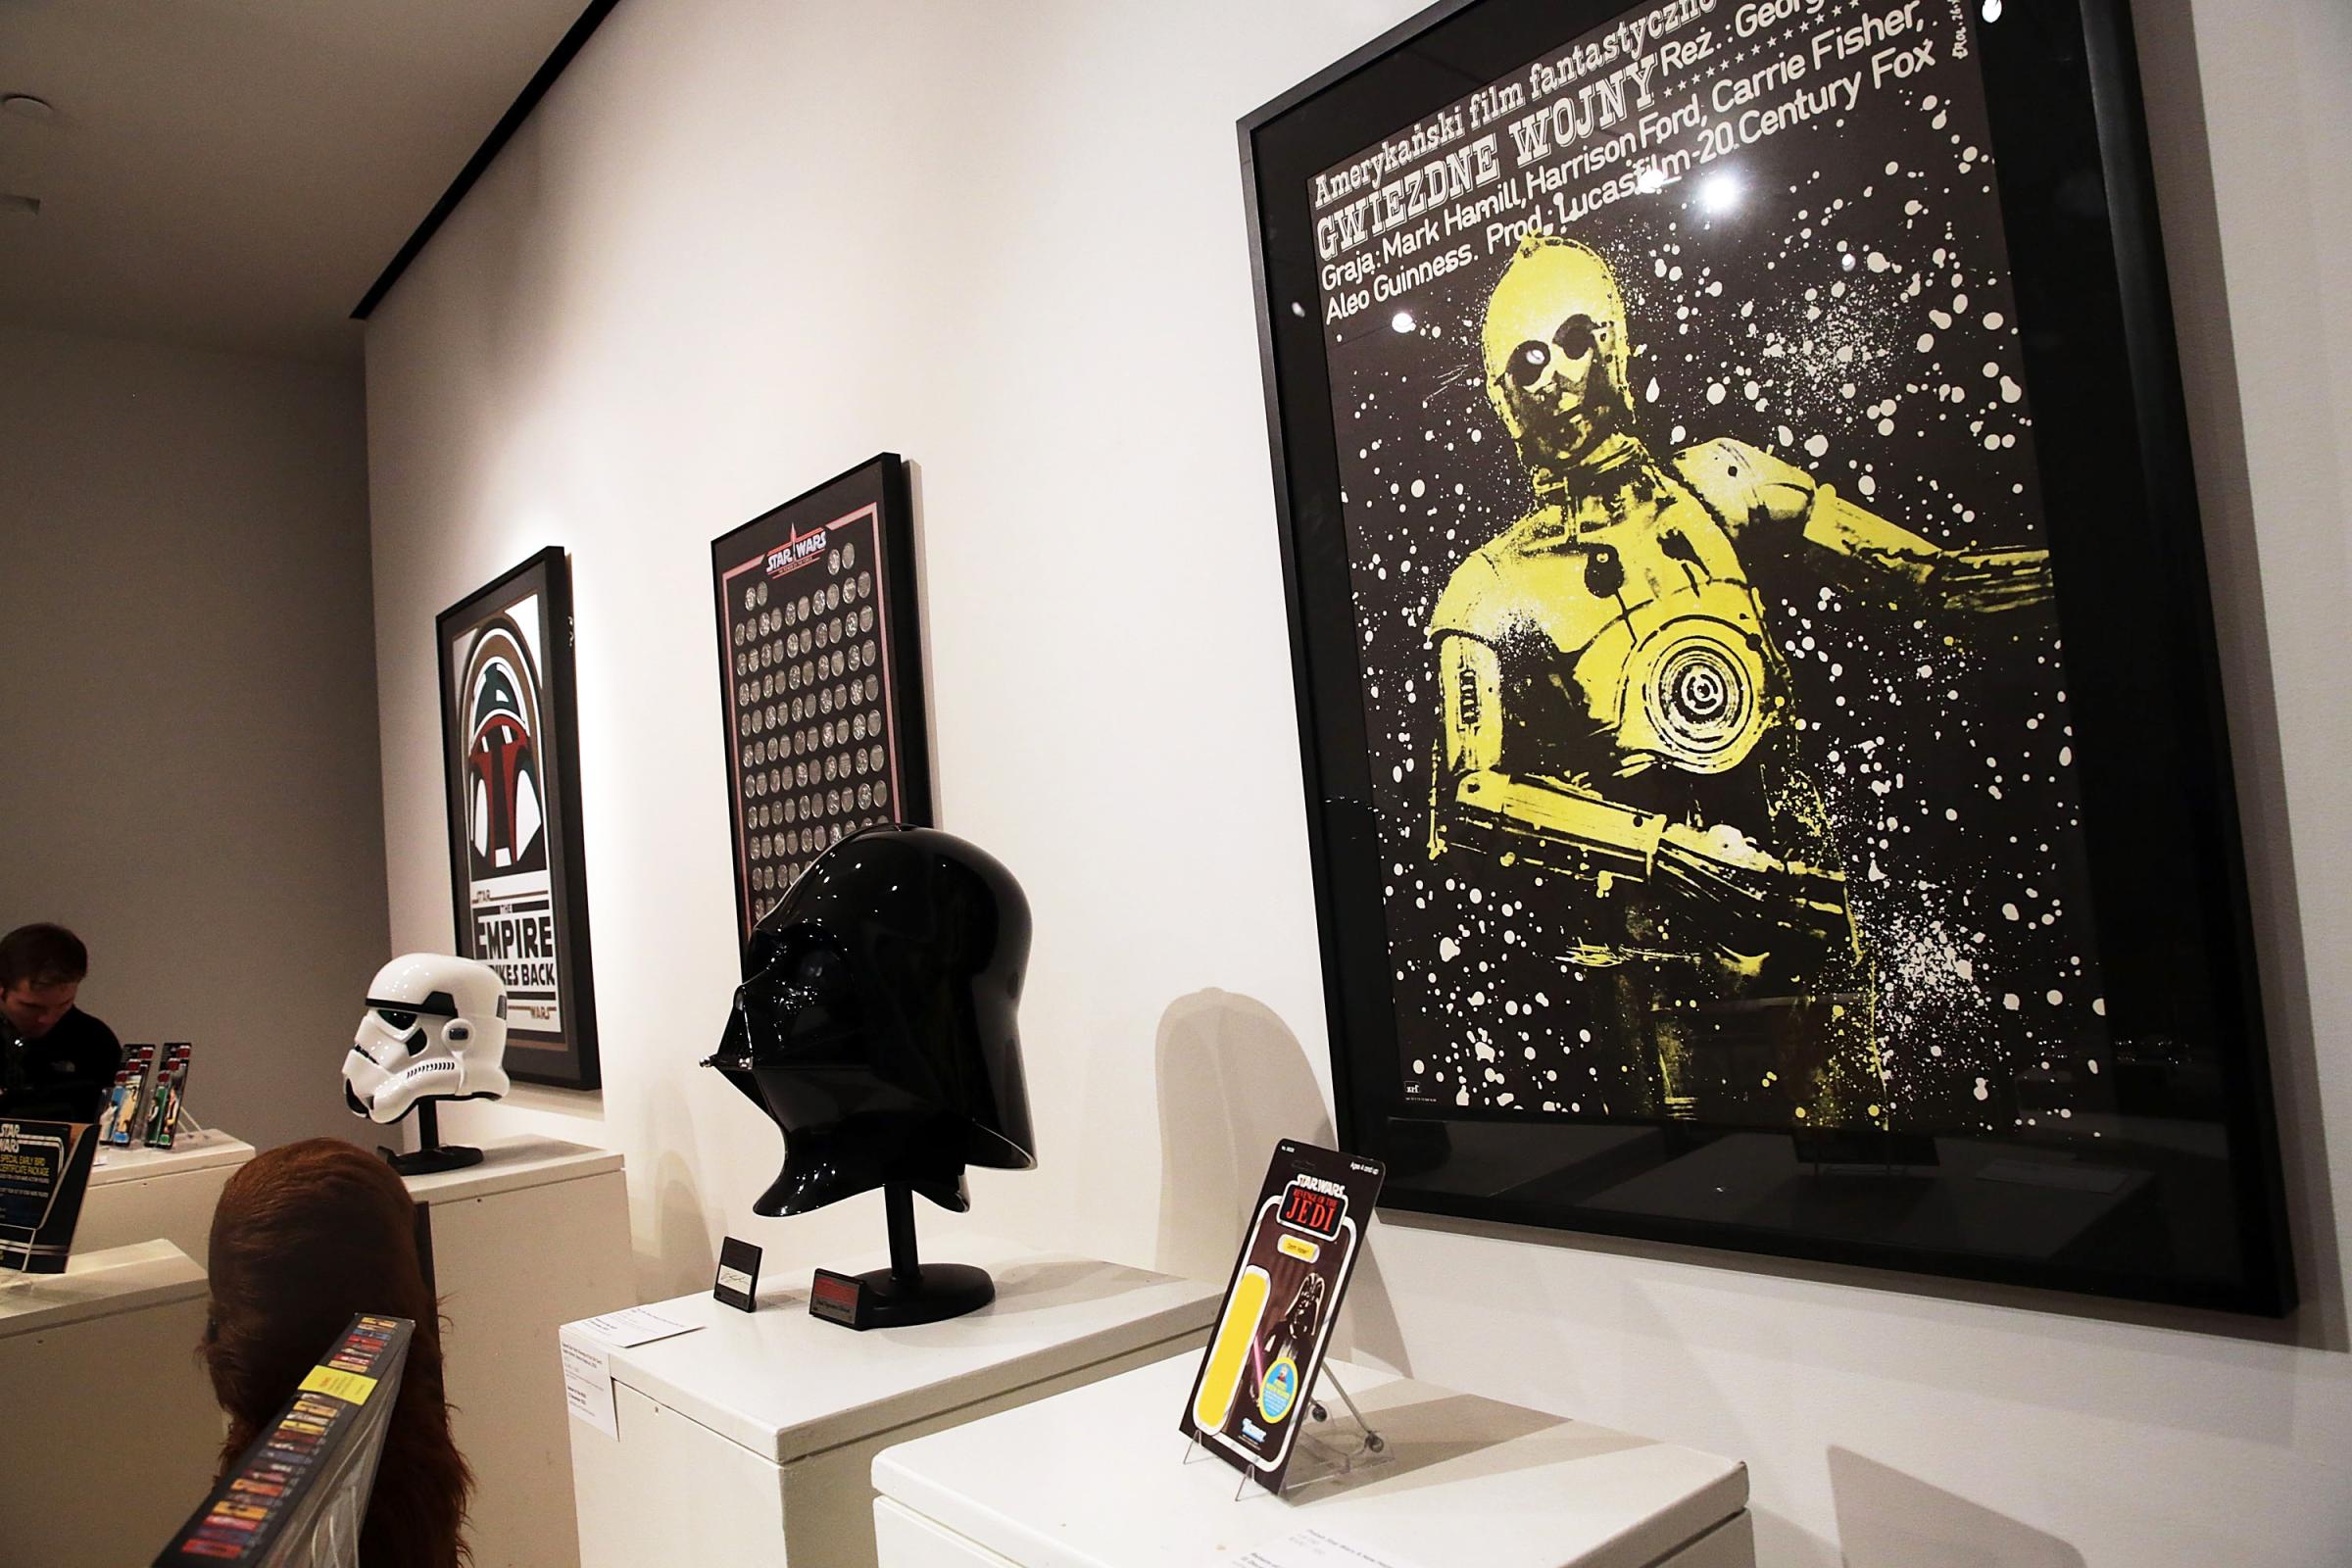 Star Wars items wait to be auctioned at Sotheby's in New York City on Dec. 2, 2015.